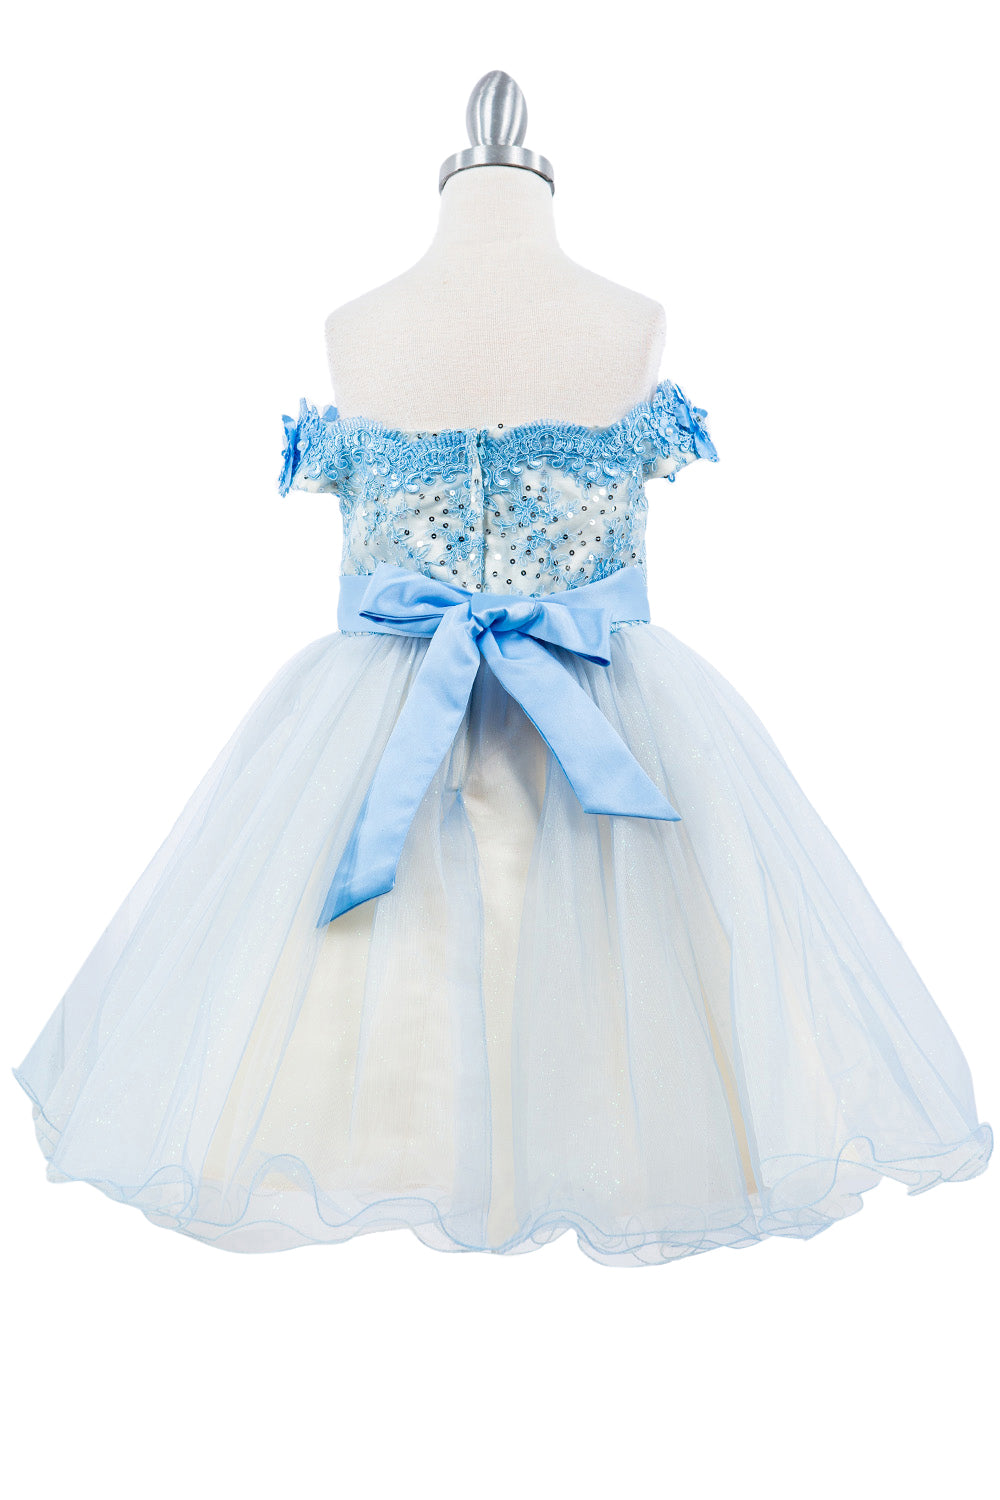 Off Shoulder Glitter Tulle Flower Girl Dress by Cinderella Couture USA AS9130